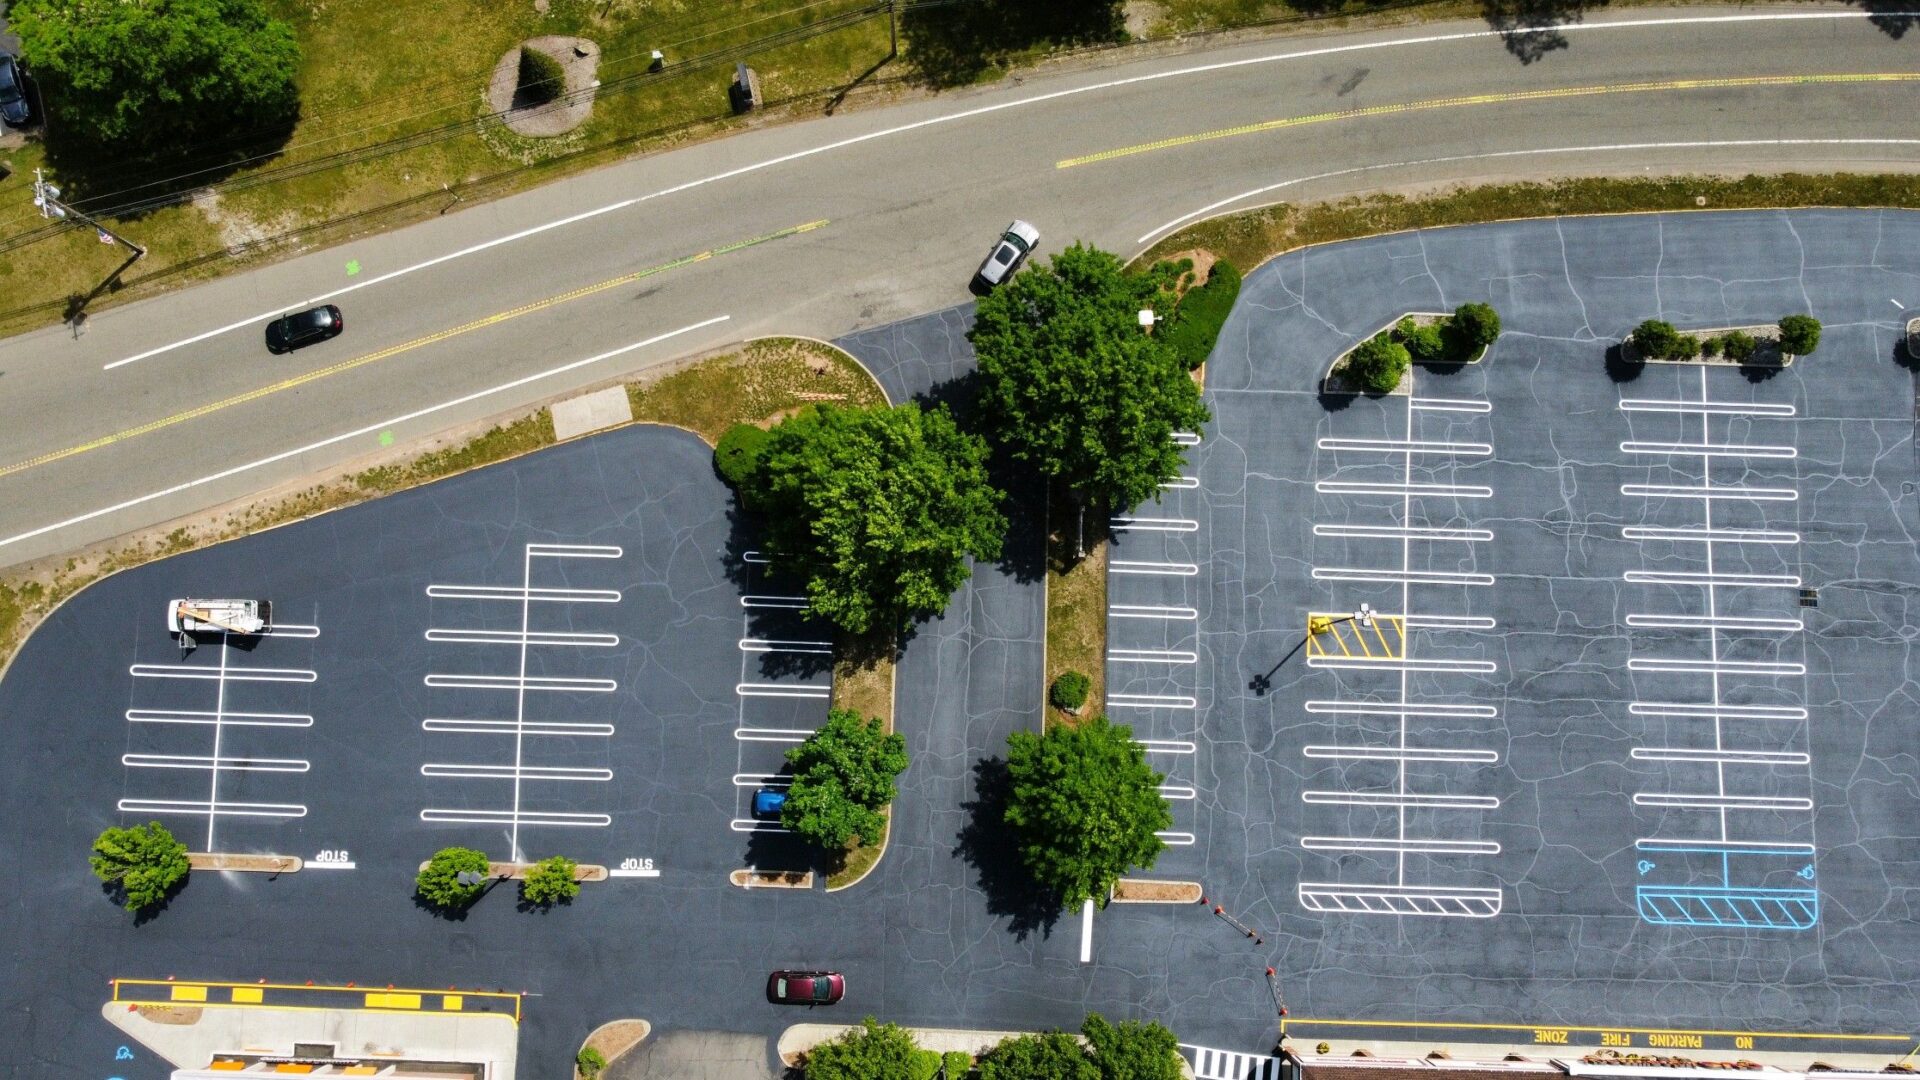 An ariel view of the parking spaces for cars